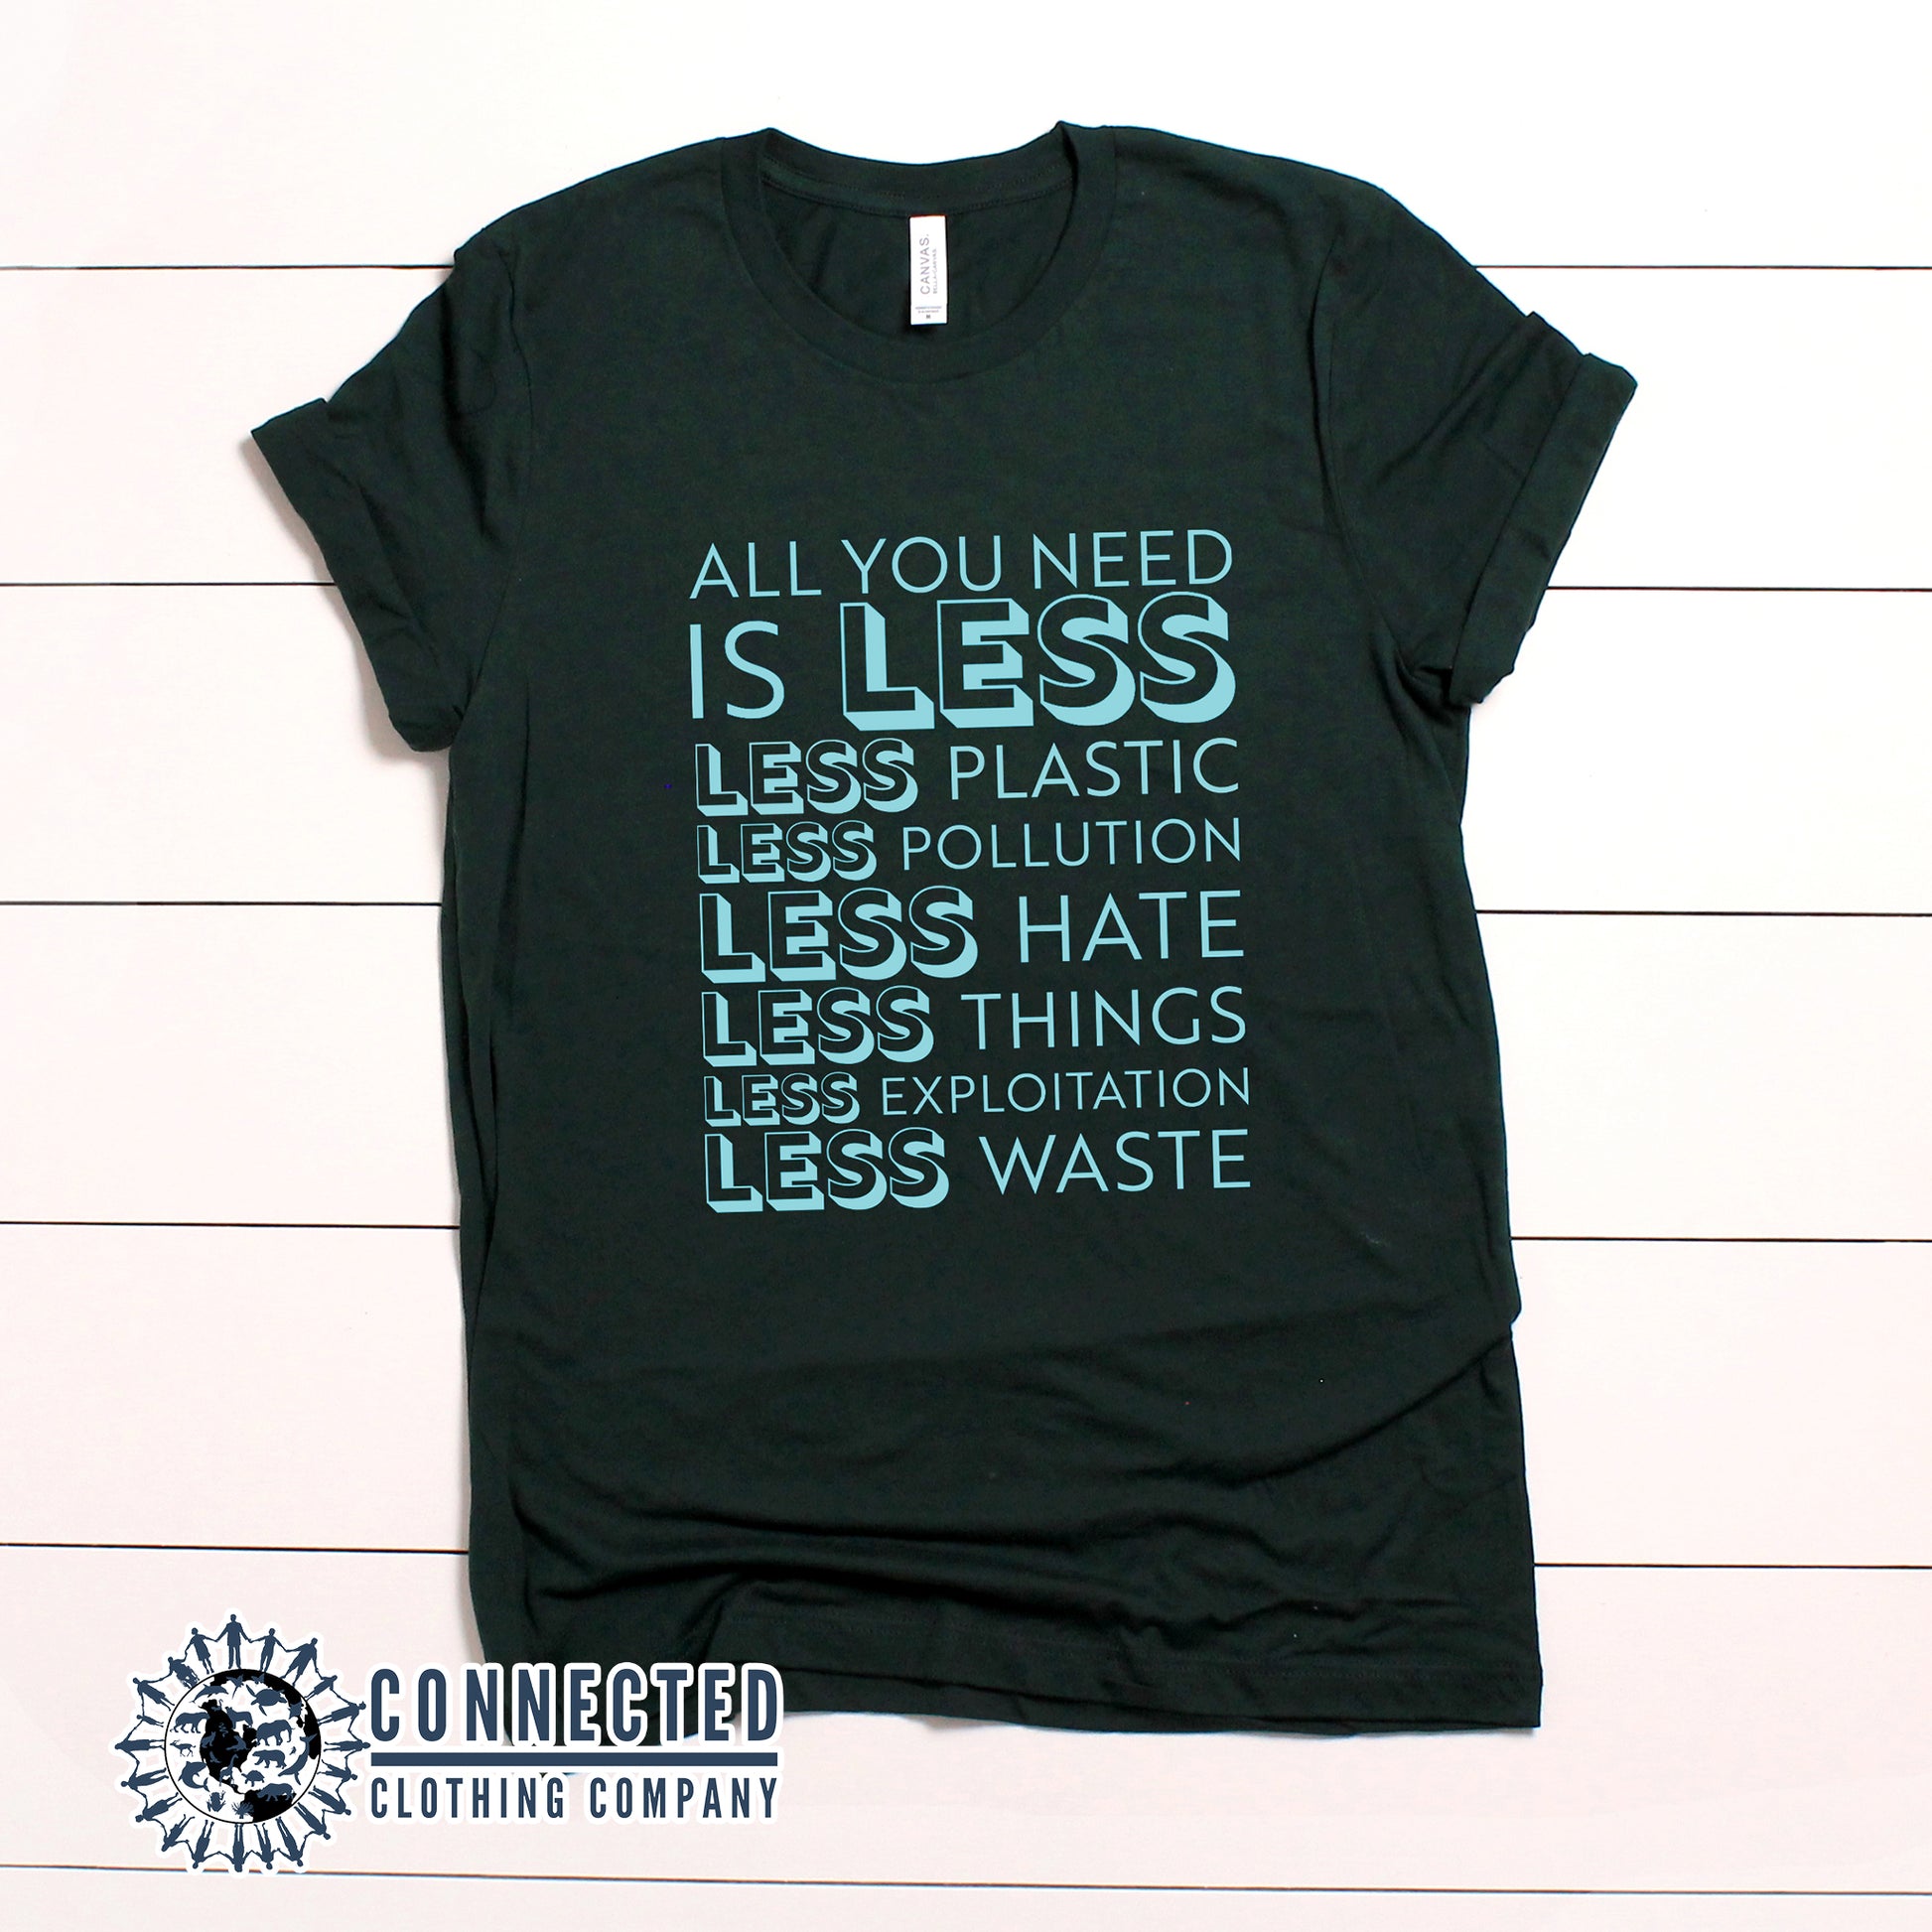 Forest Green All You Need Is Less Short-Sleeve Unisex Tee reads "all you need is less. less plastic. less pollution. less hate. less things. less exploitation. less waste." - Connected Clothing Company - Ethically and Sustainably Made - 10% of profits donated to Mission Blue ocean conservation